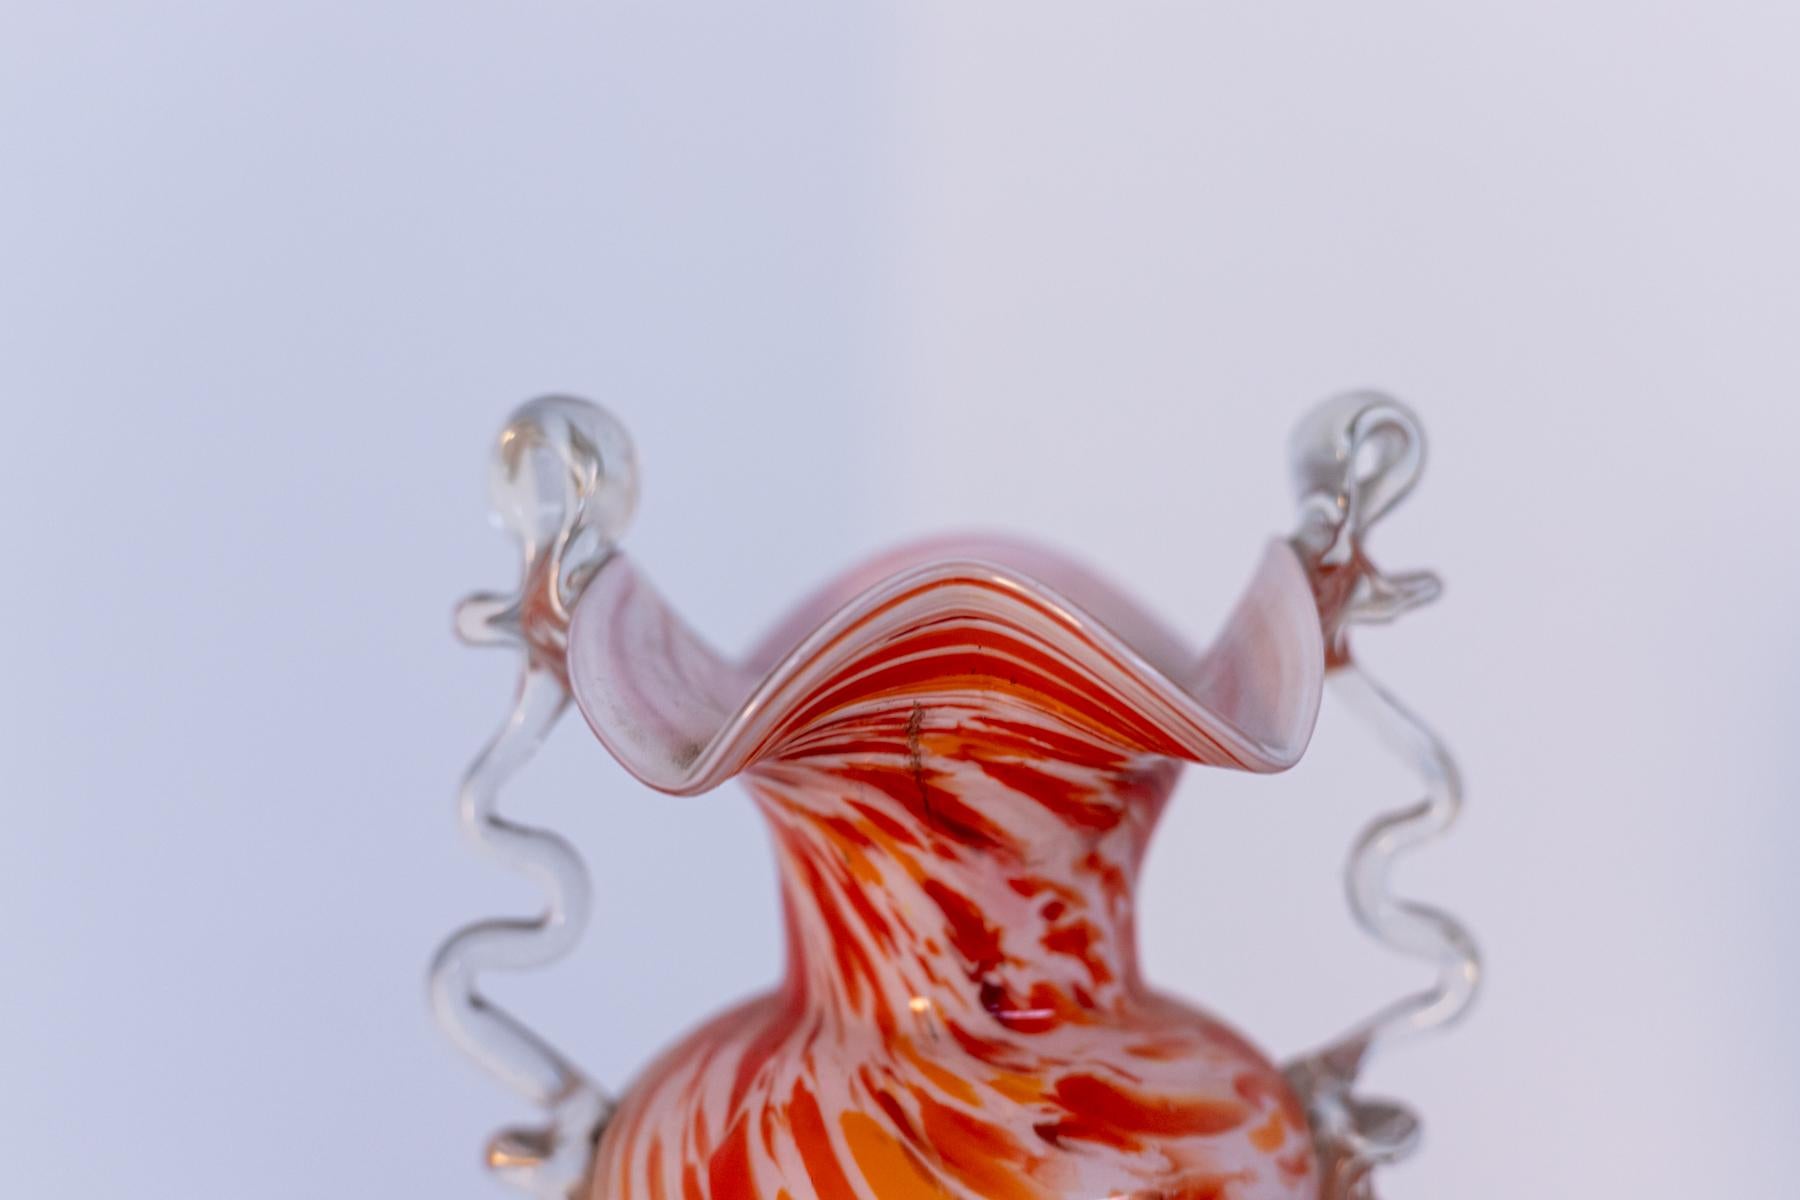 Superb Murano glass vase designed by the Toso brothers in 1940. The vase has very particular nuances ranging from orange to white, thanks to the beautiful processing of the glass. The base and handles are in transparent Murano glass.
This vase is